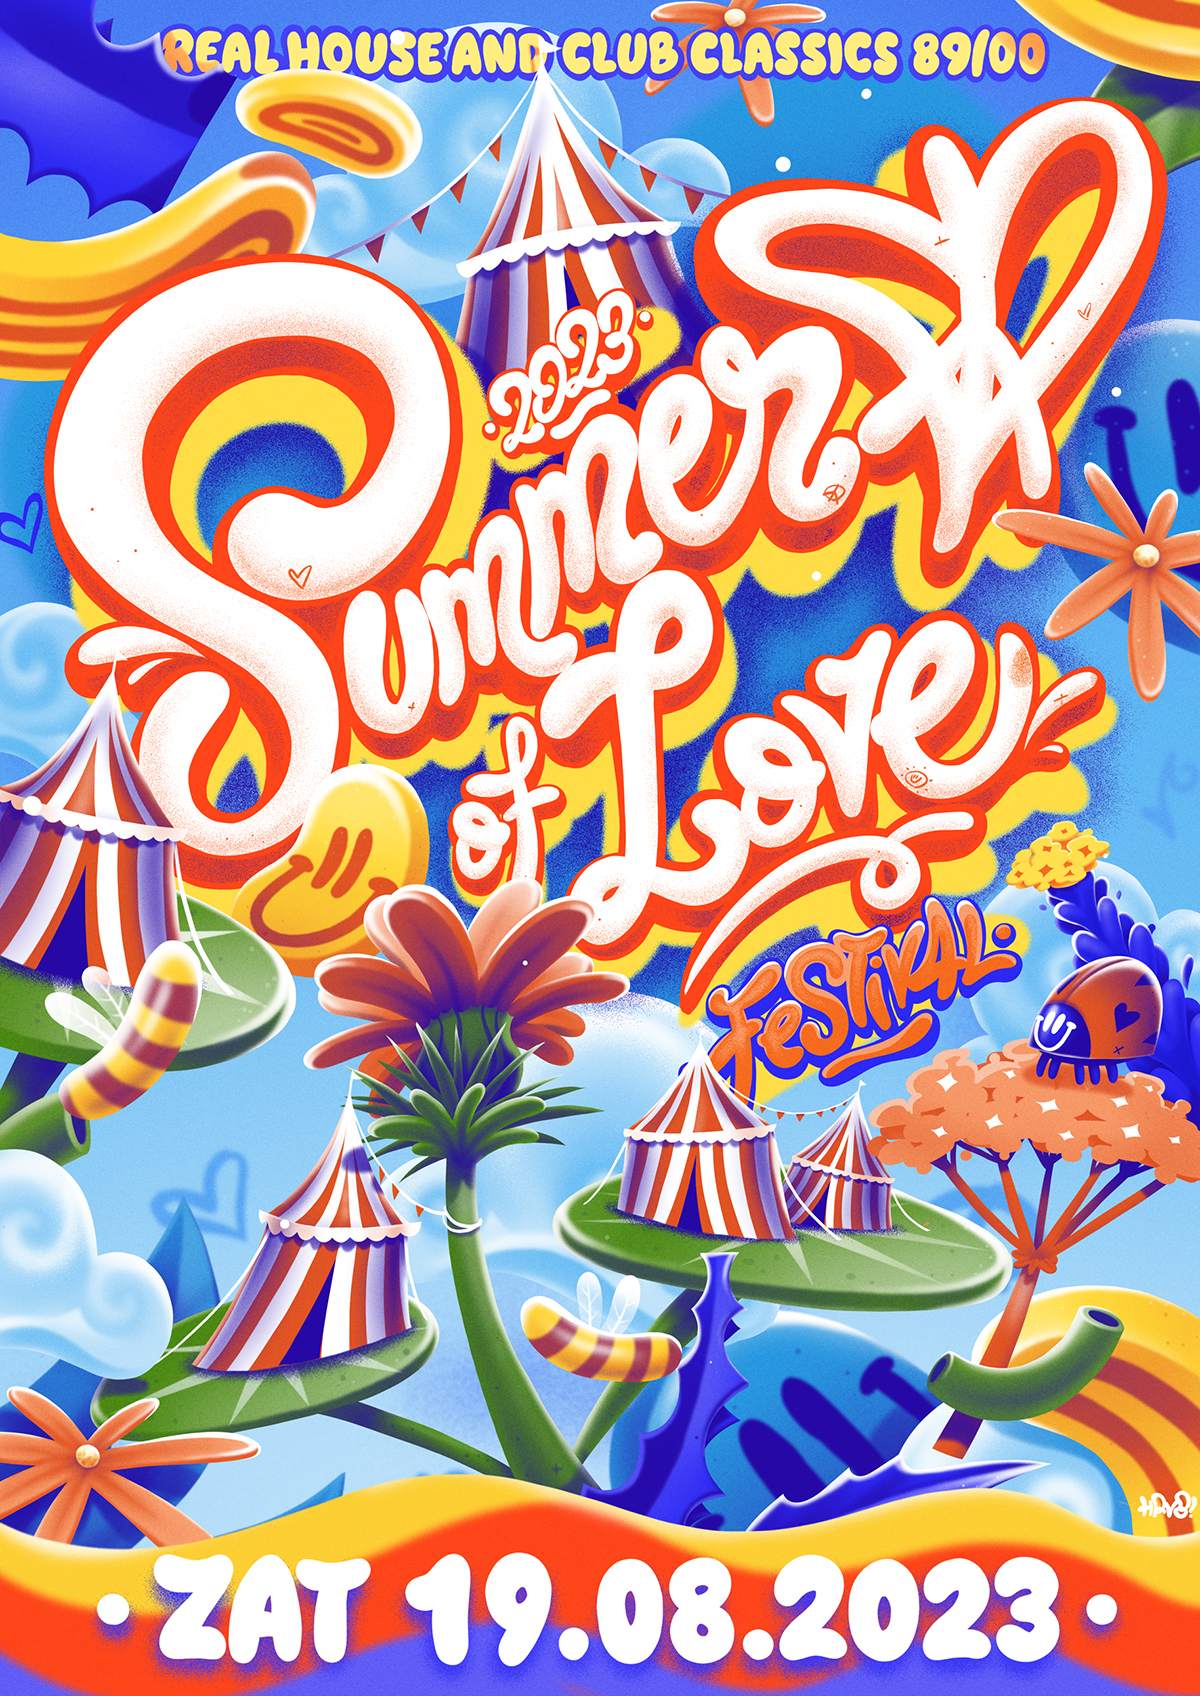 SOLD OUT - Summer Of Love - Thuishaven[terrein] - Real House & Club Classics 89/05 - Página frontal